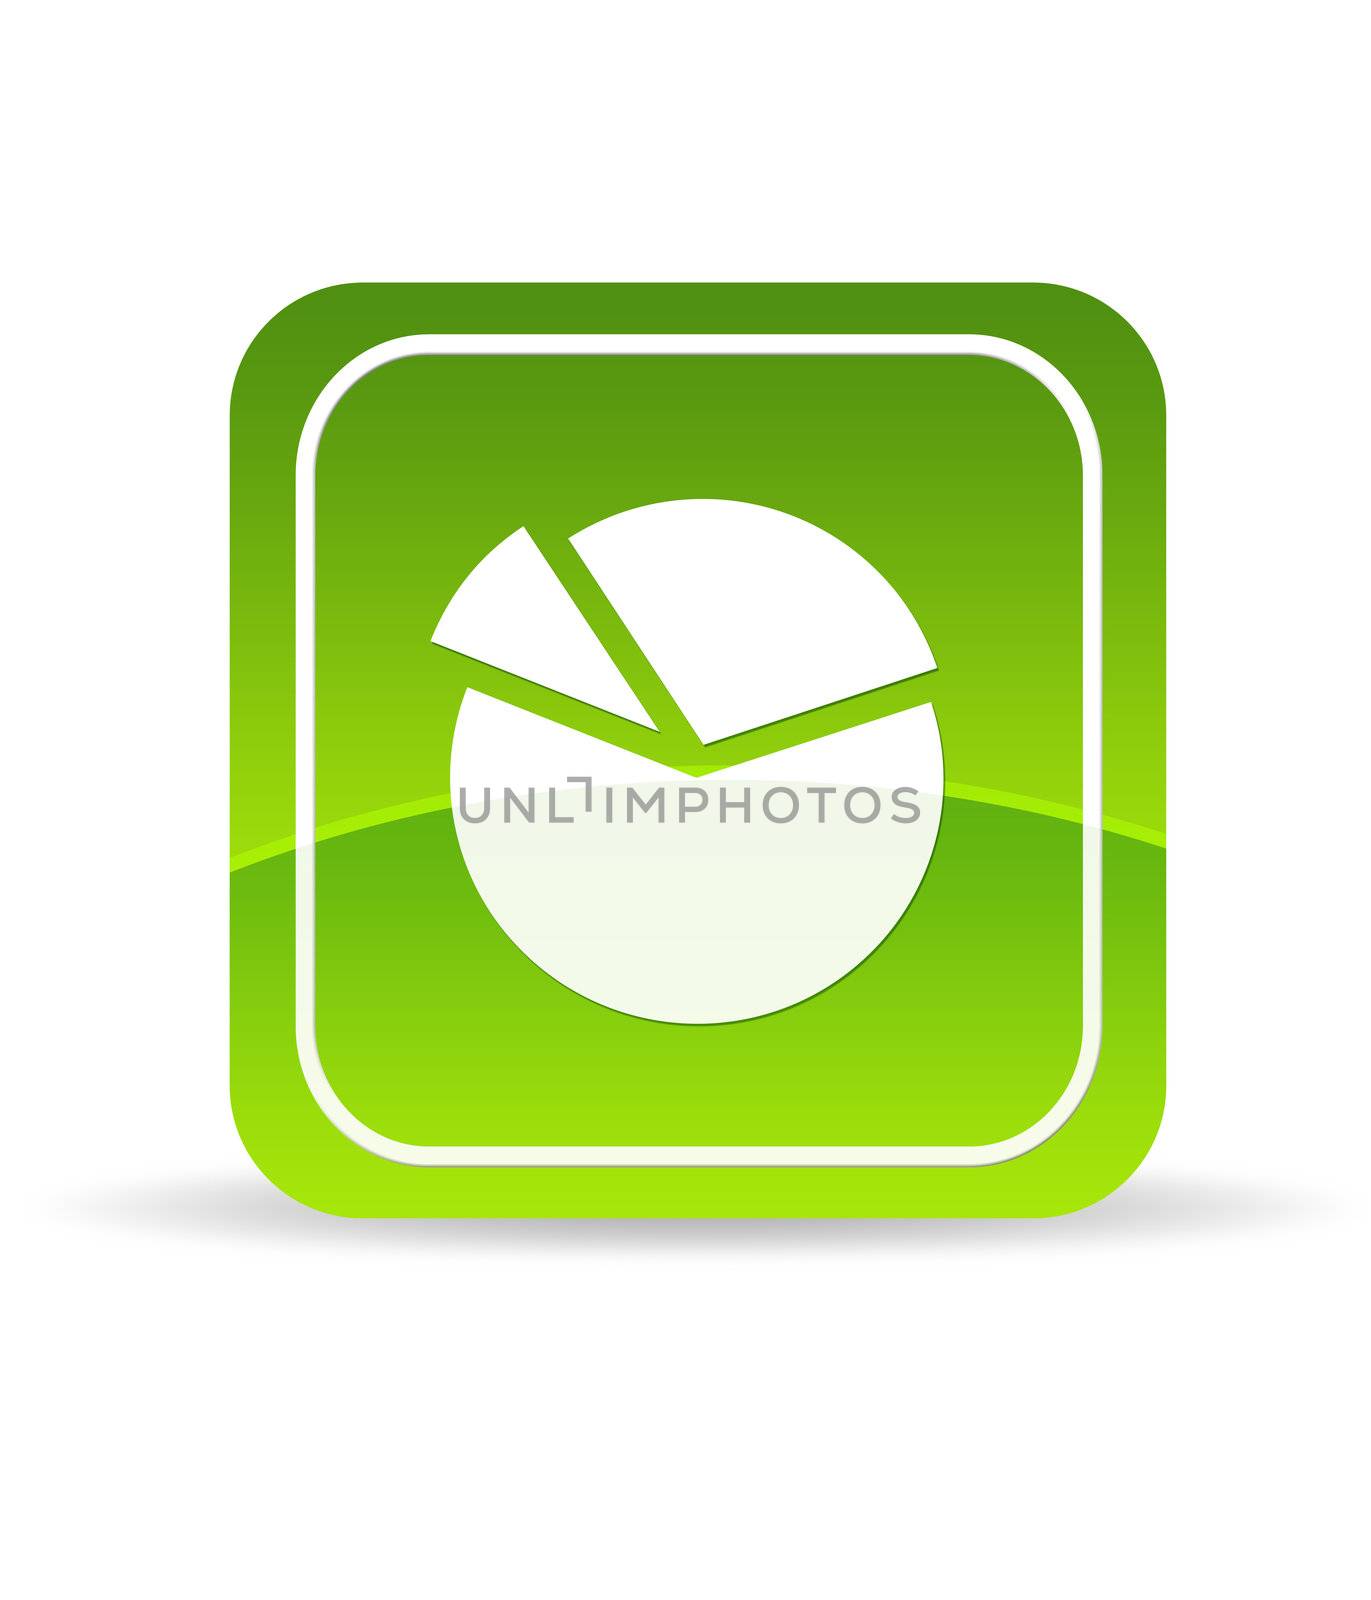 High resolution green market share chart icon on white background.